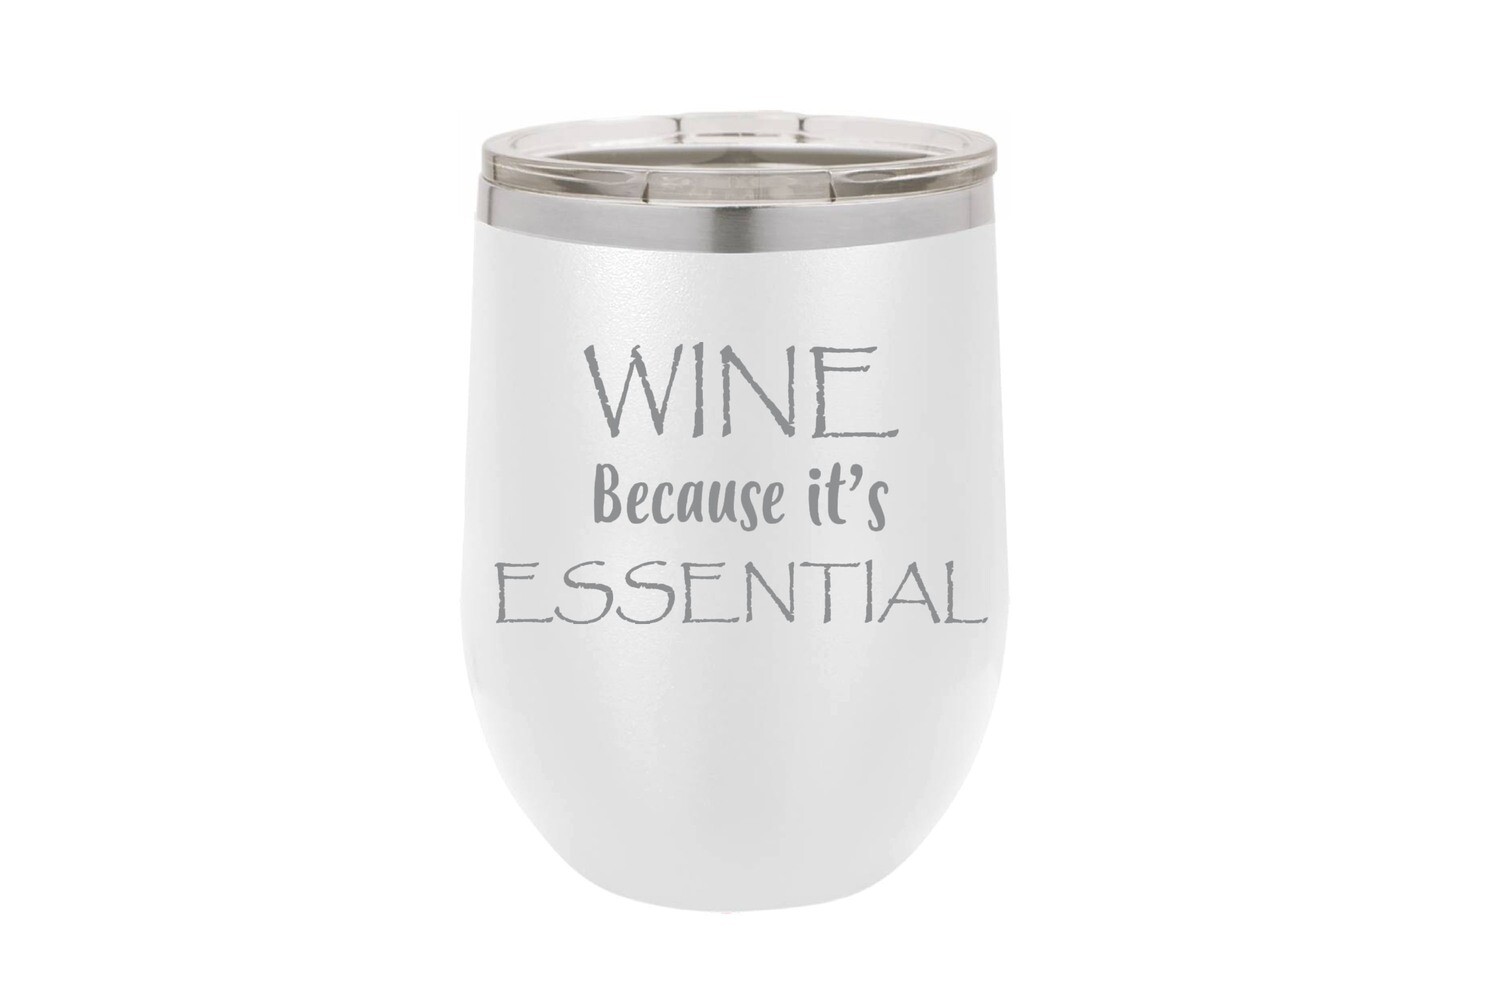 Wine Because it's ESSENTIAL Insulated Tumbler 12 oz